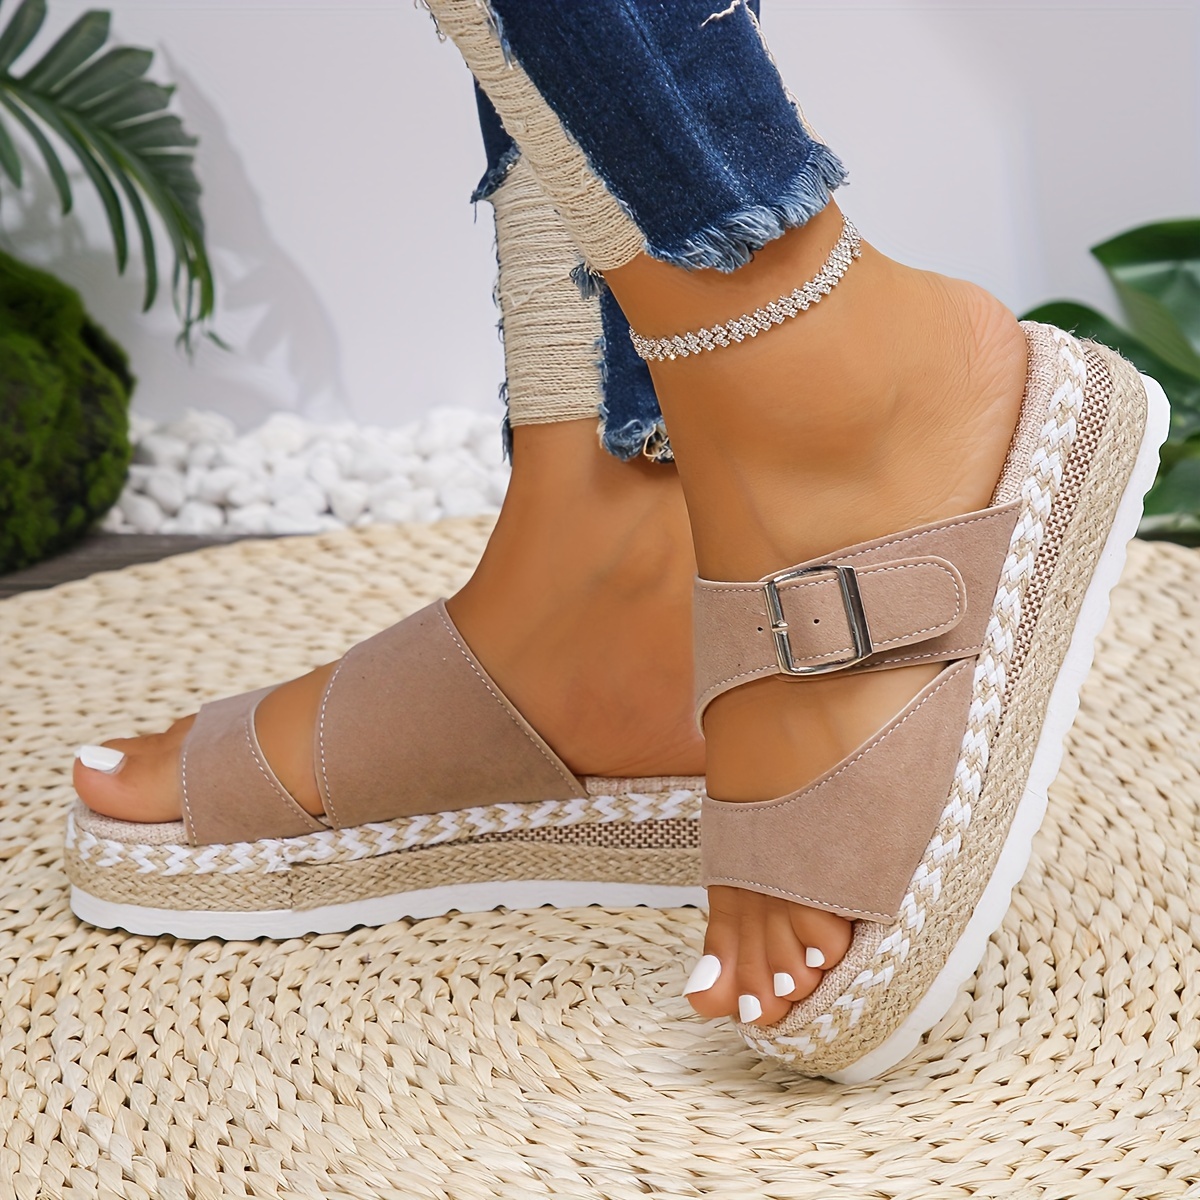 

Women's Solid Color Slide Sandals, Casual Open Toe Summer Shoes, Comfortable Slip On Sandals